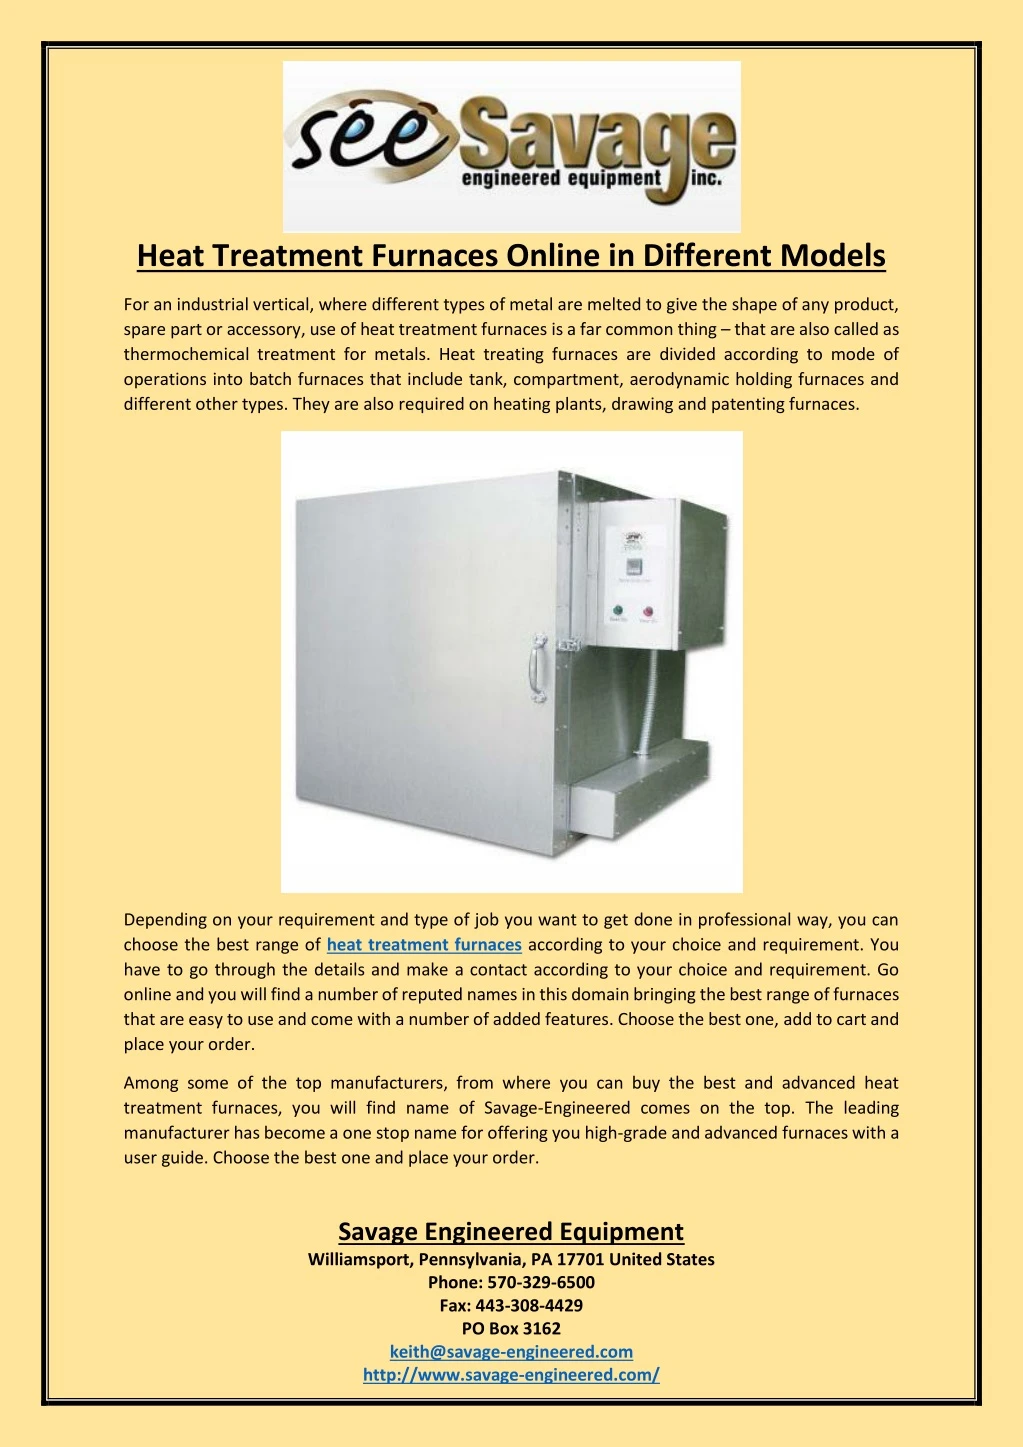 heat treatment furnaces online in different models